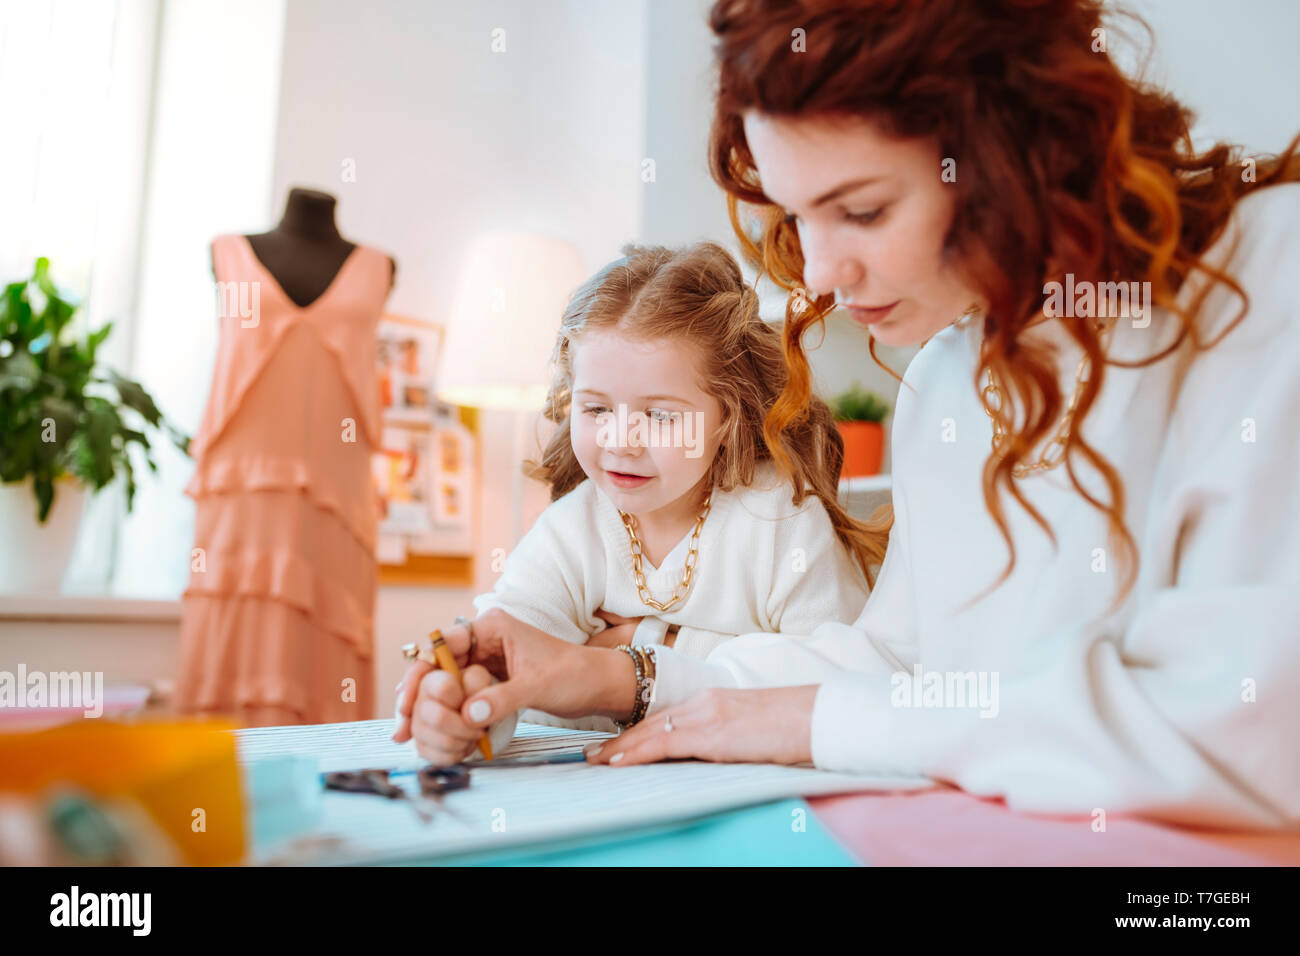 Appealing cute girl standing near mother designing dresses Stock Photo